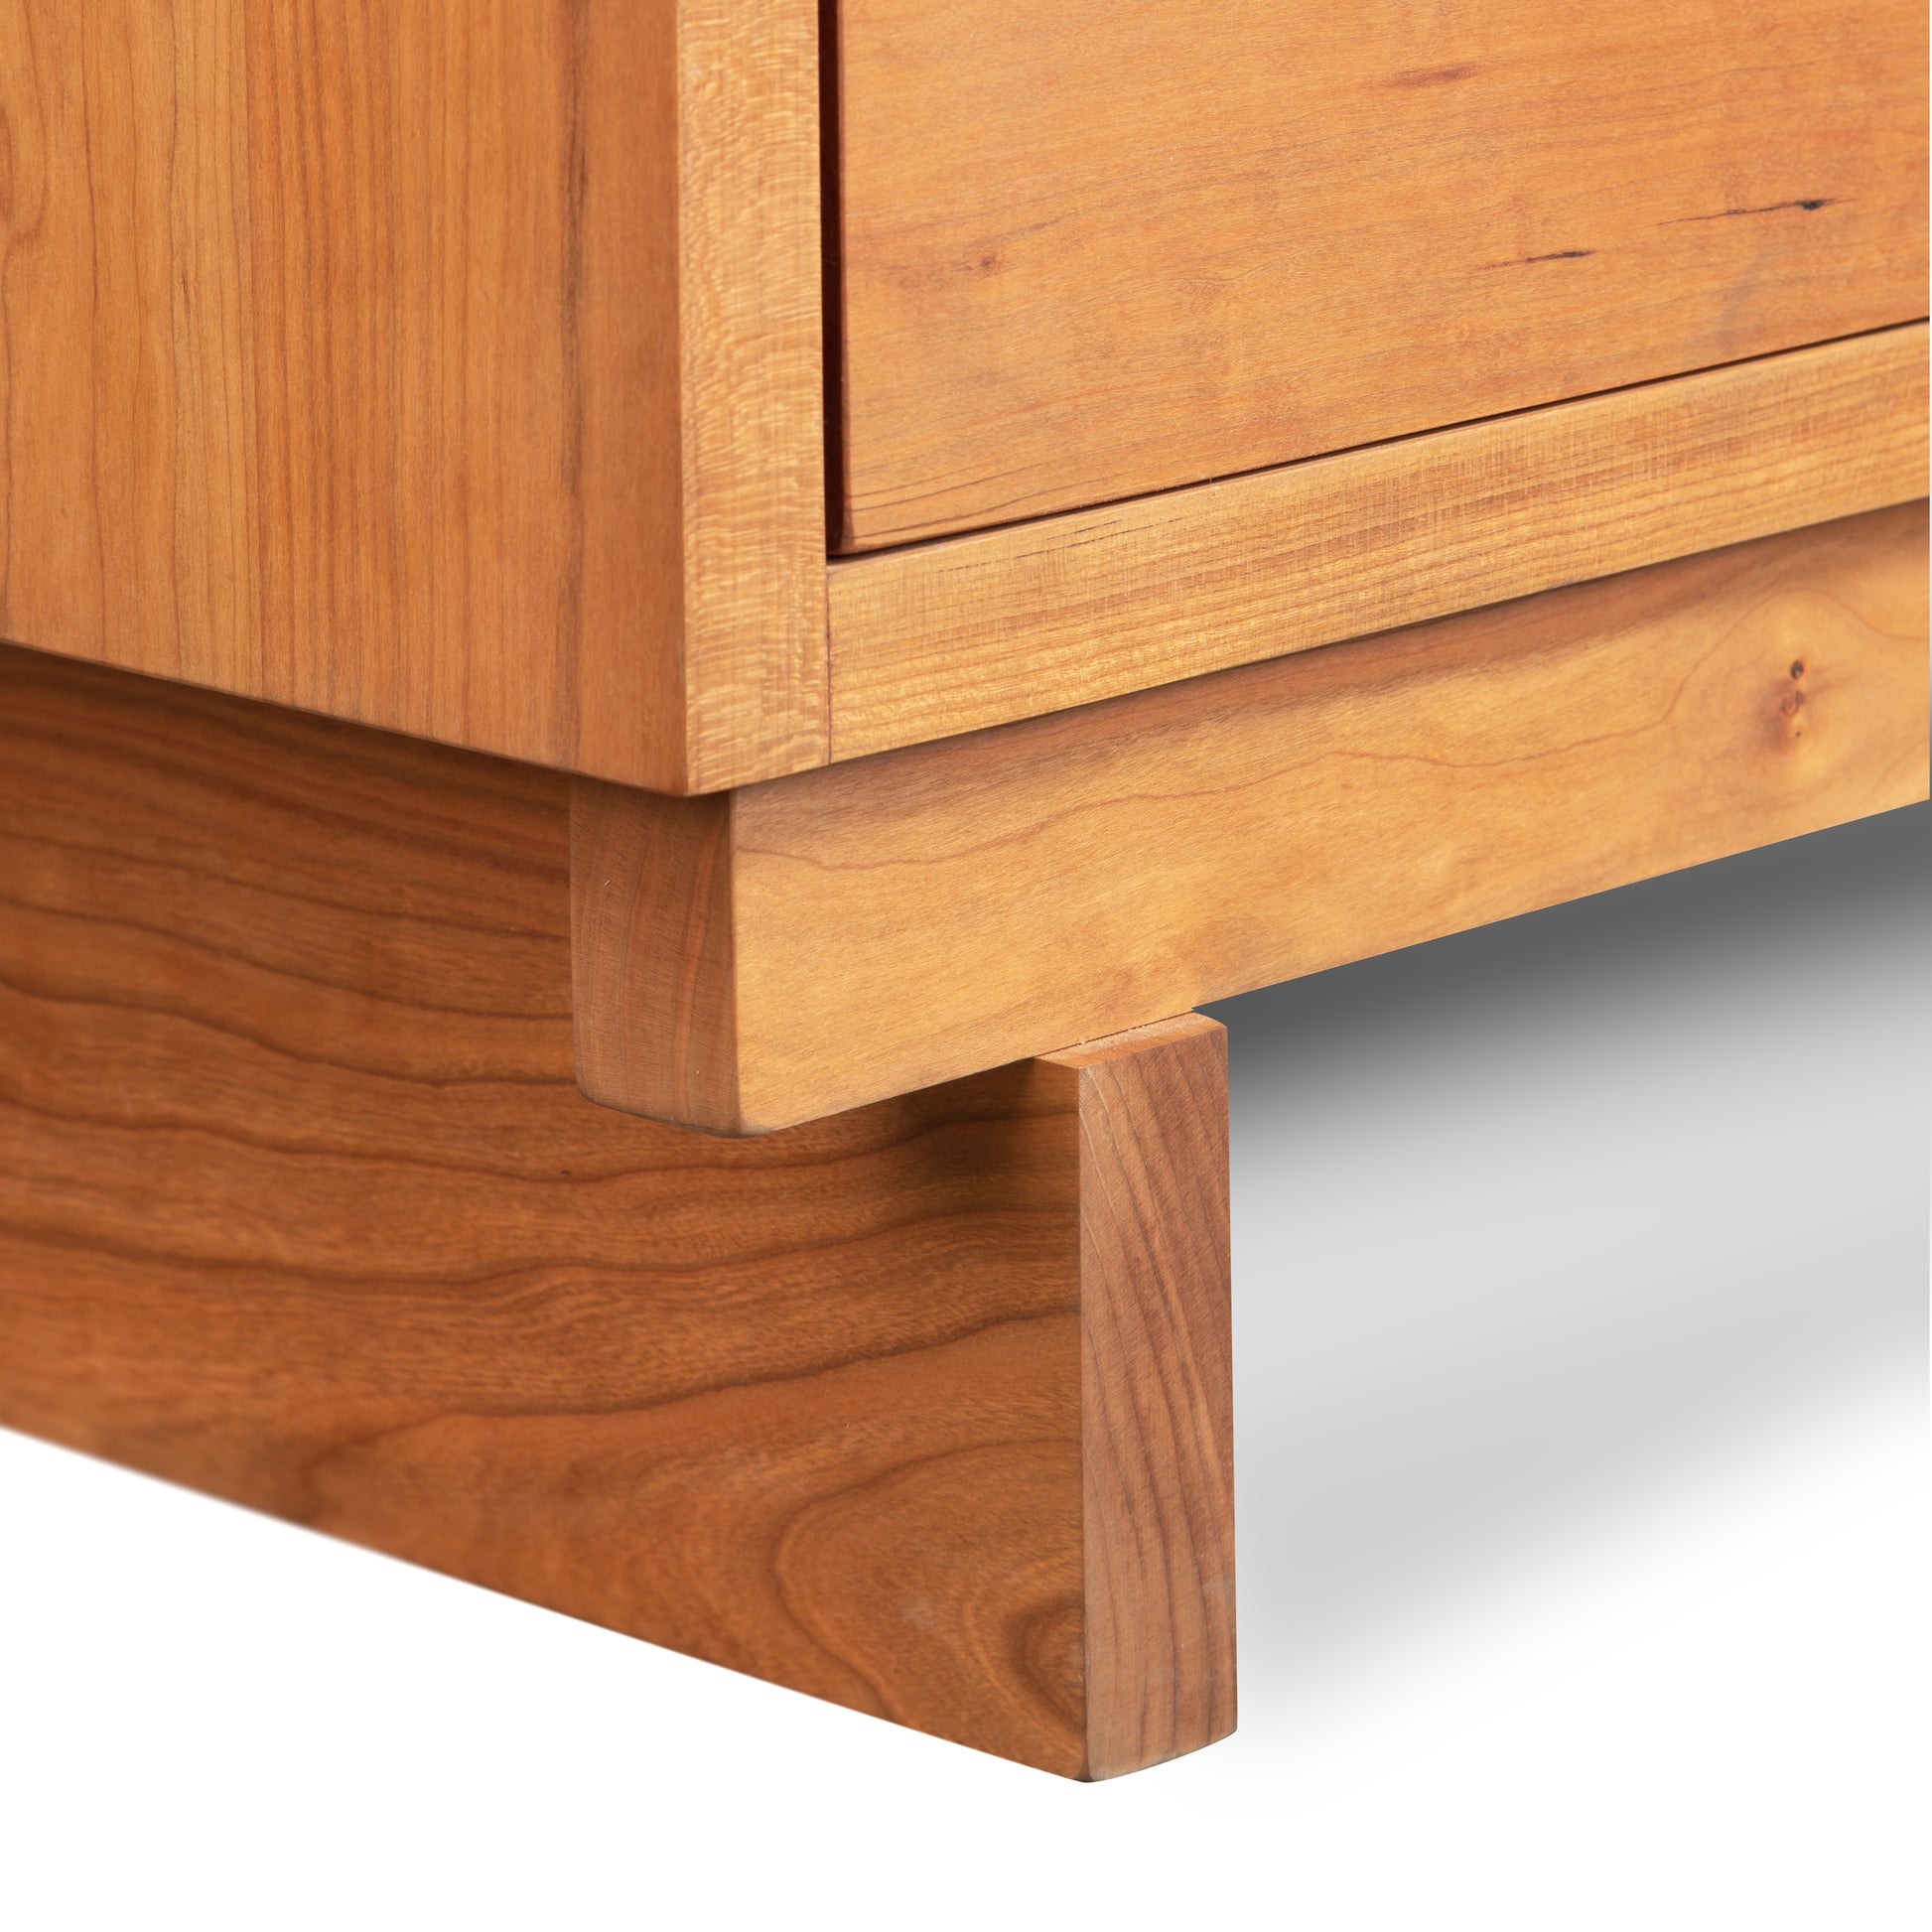 Close-up of a Vermont Furniture Designs Loft 5-Drawer Chest's corner, highlighting the grain patterns of natural solid hardwood and Vermont craftsmanship details.